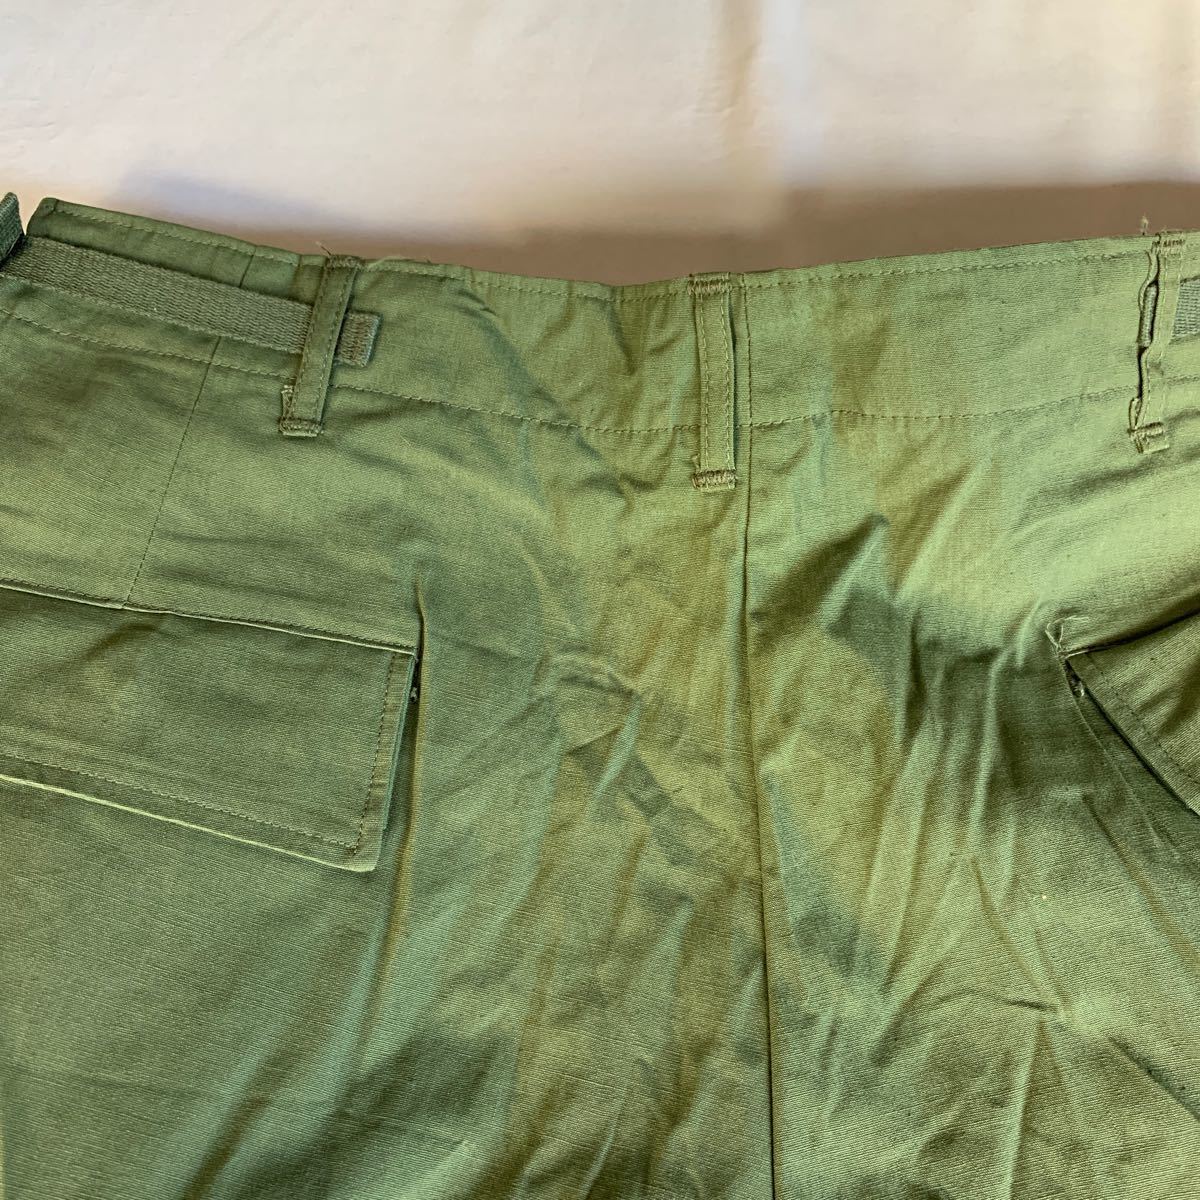 60s U.S.ARMY JUNGLE FATIGUE TROUSERS 3rd DEAD STOCK USARMY ジャングルファティーグ カーゴパンツ ノンリップ デッドストック 送料無料 の画像9